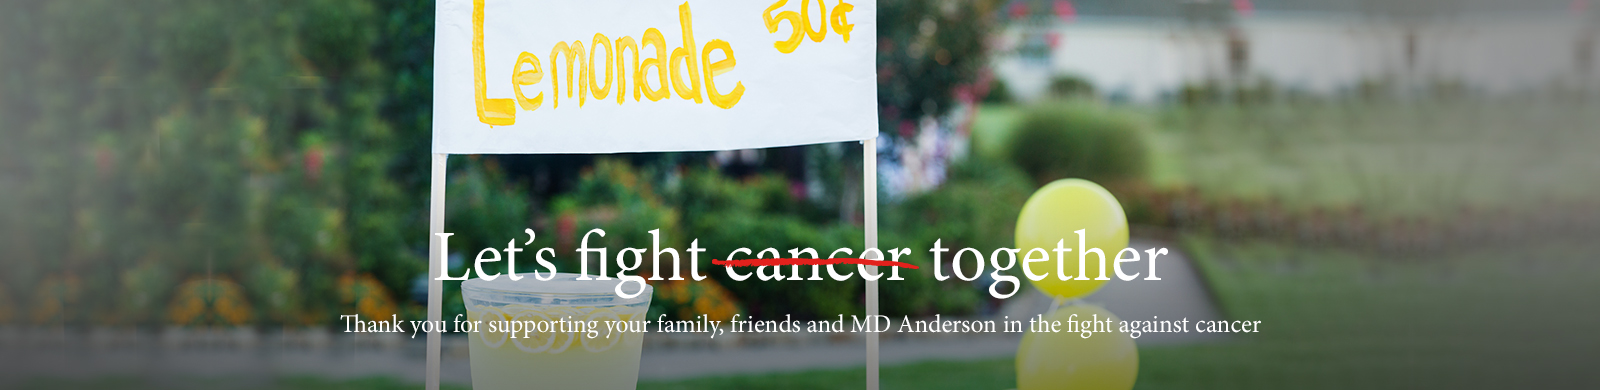 Let's fight cancer together. Thank you for supporting your family, friends and MD Anderson in the fight against cancer.